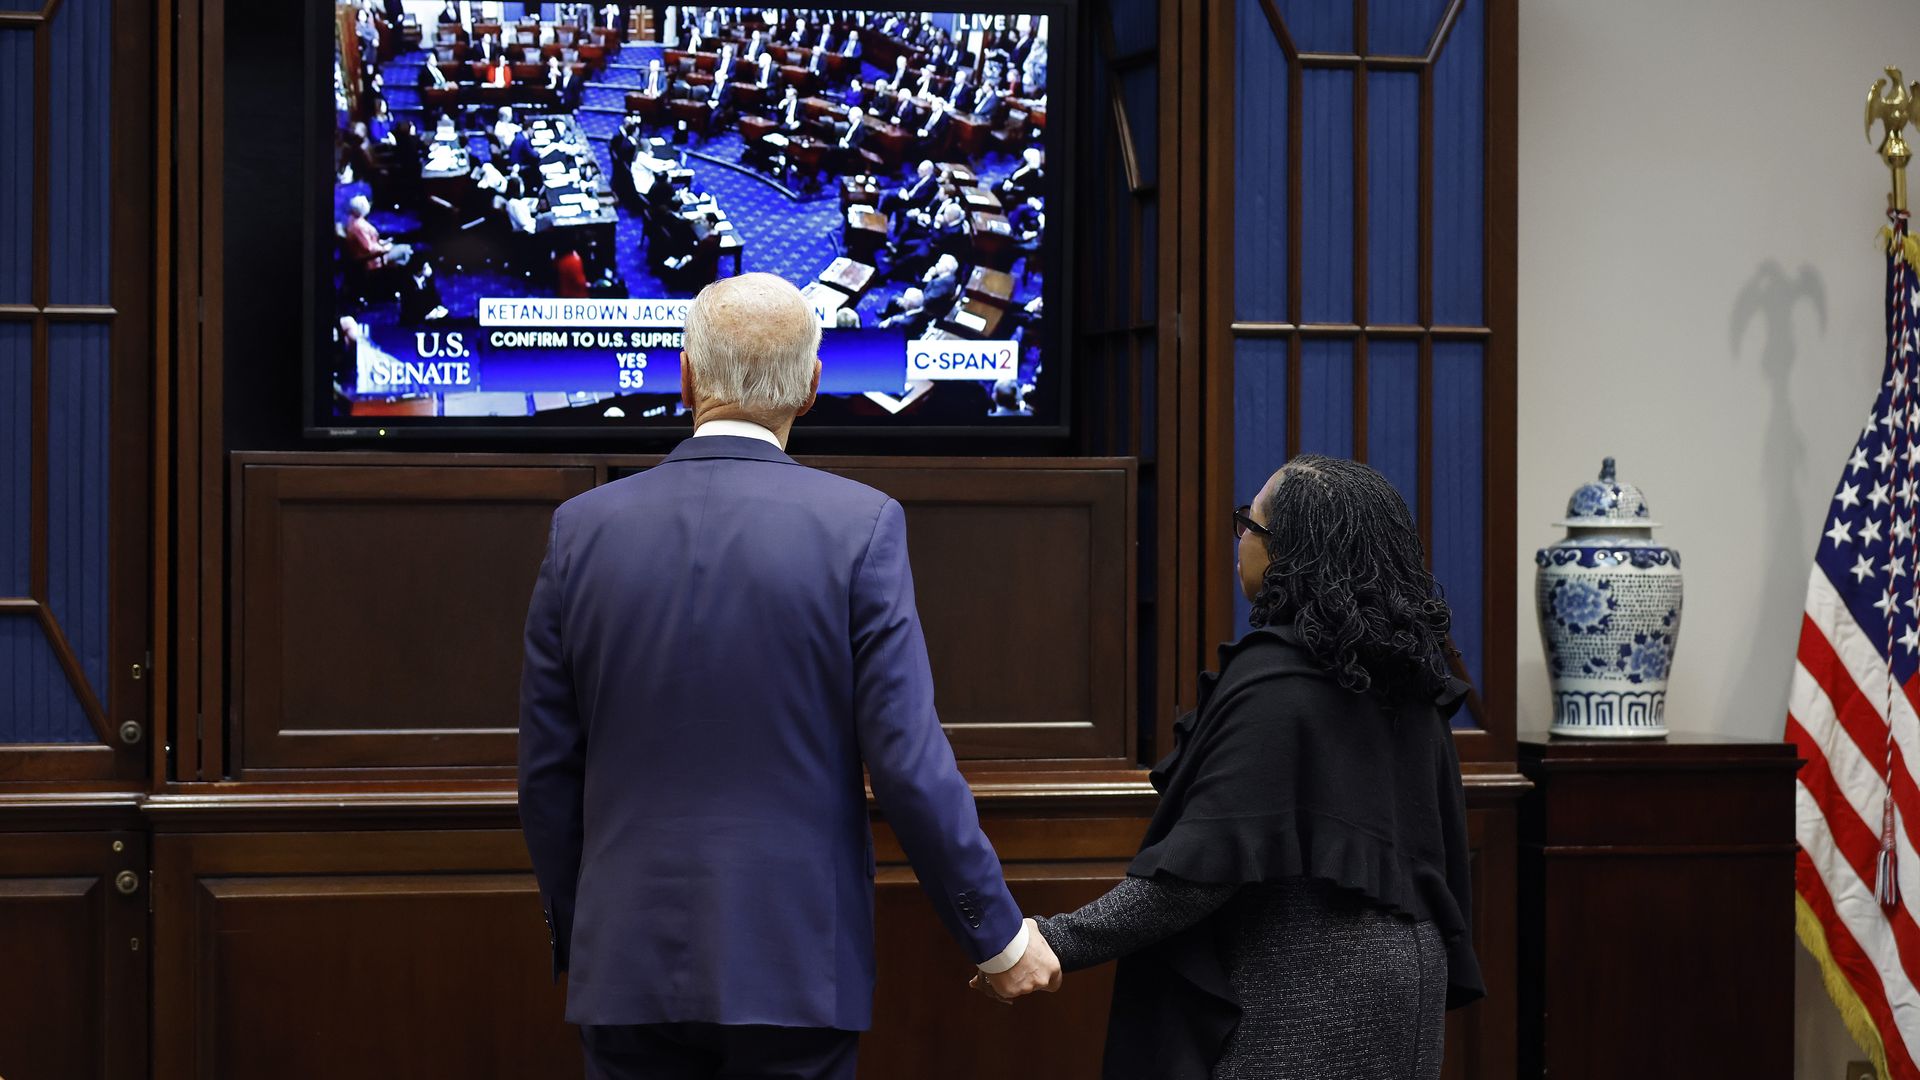 President Biden is seen holding hands with Ketanji Brown Jackson as the Senate votes to confirm her to the Supreme Court.